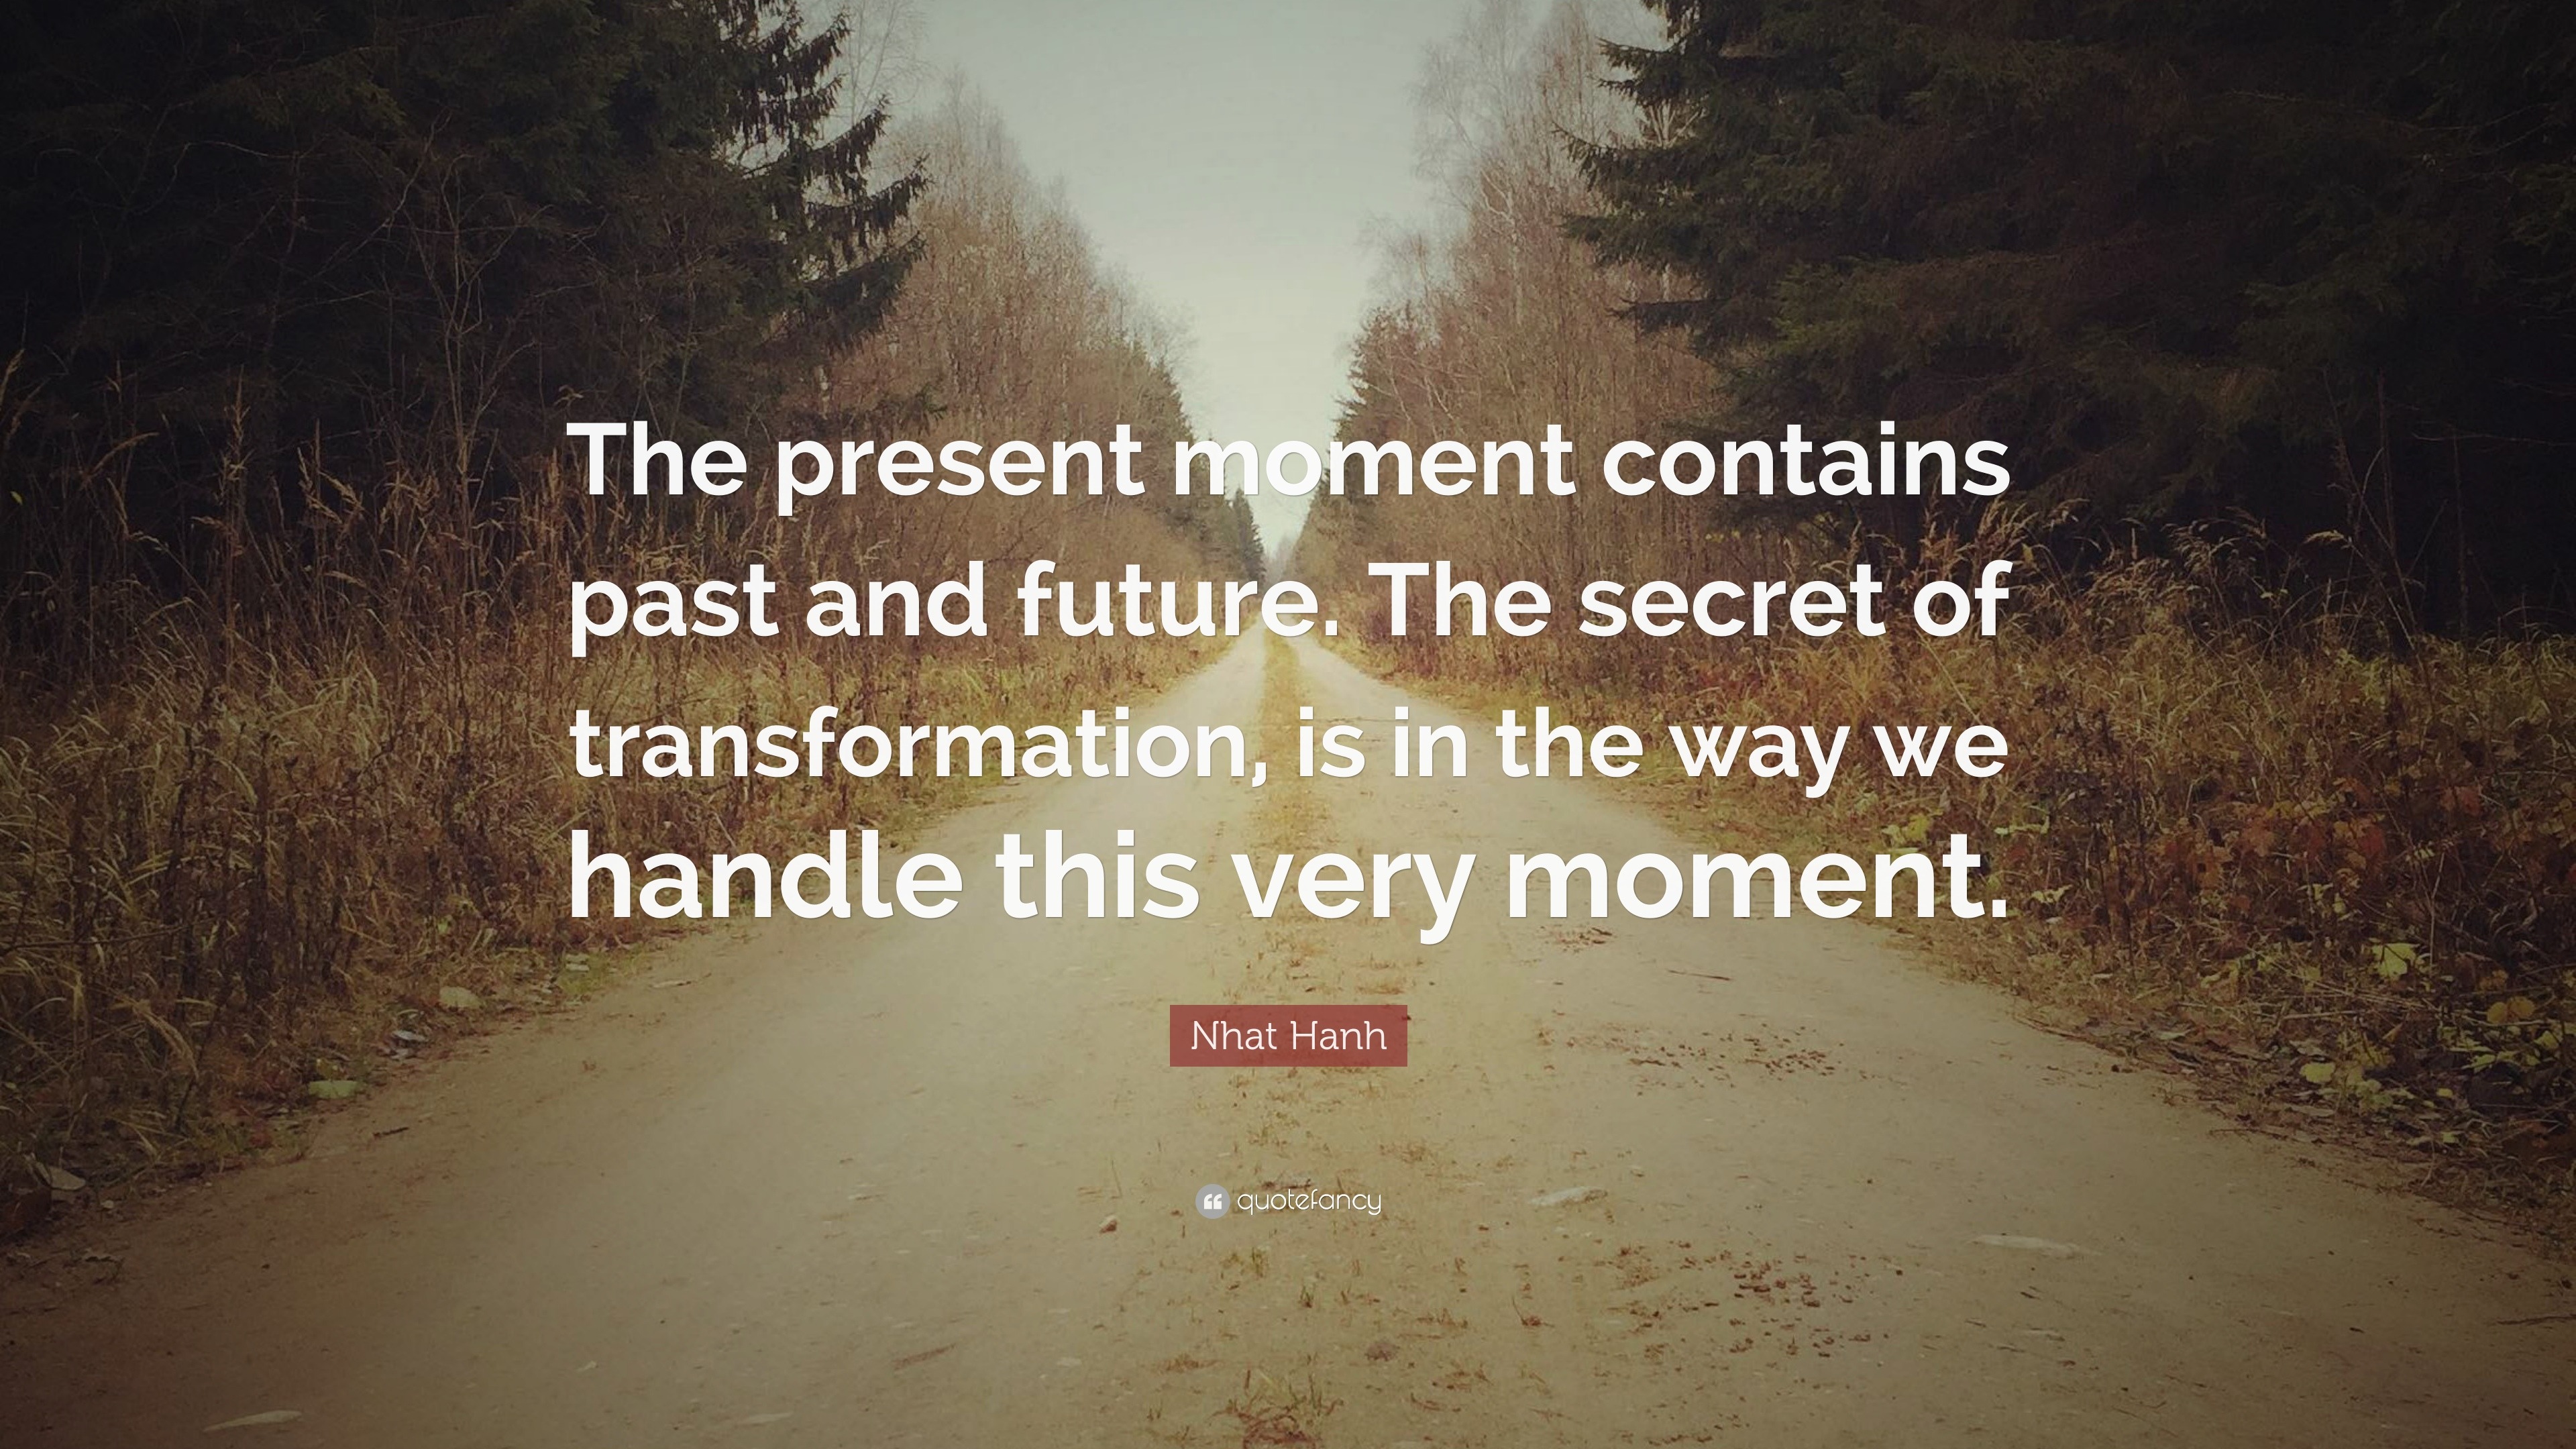 Nhat Hanh Quotes (100 wallpapers) - Quotefancy